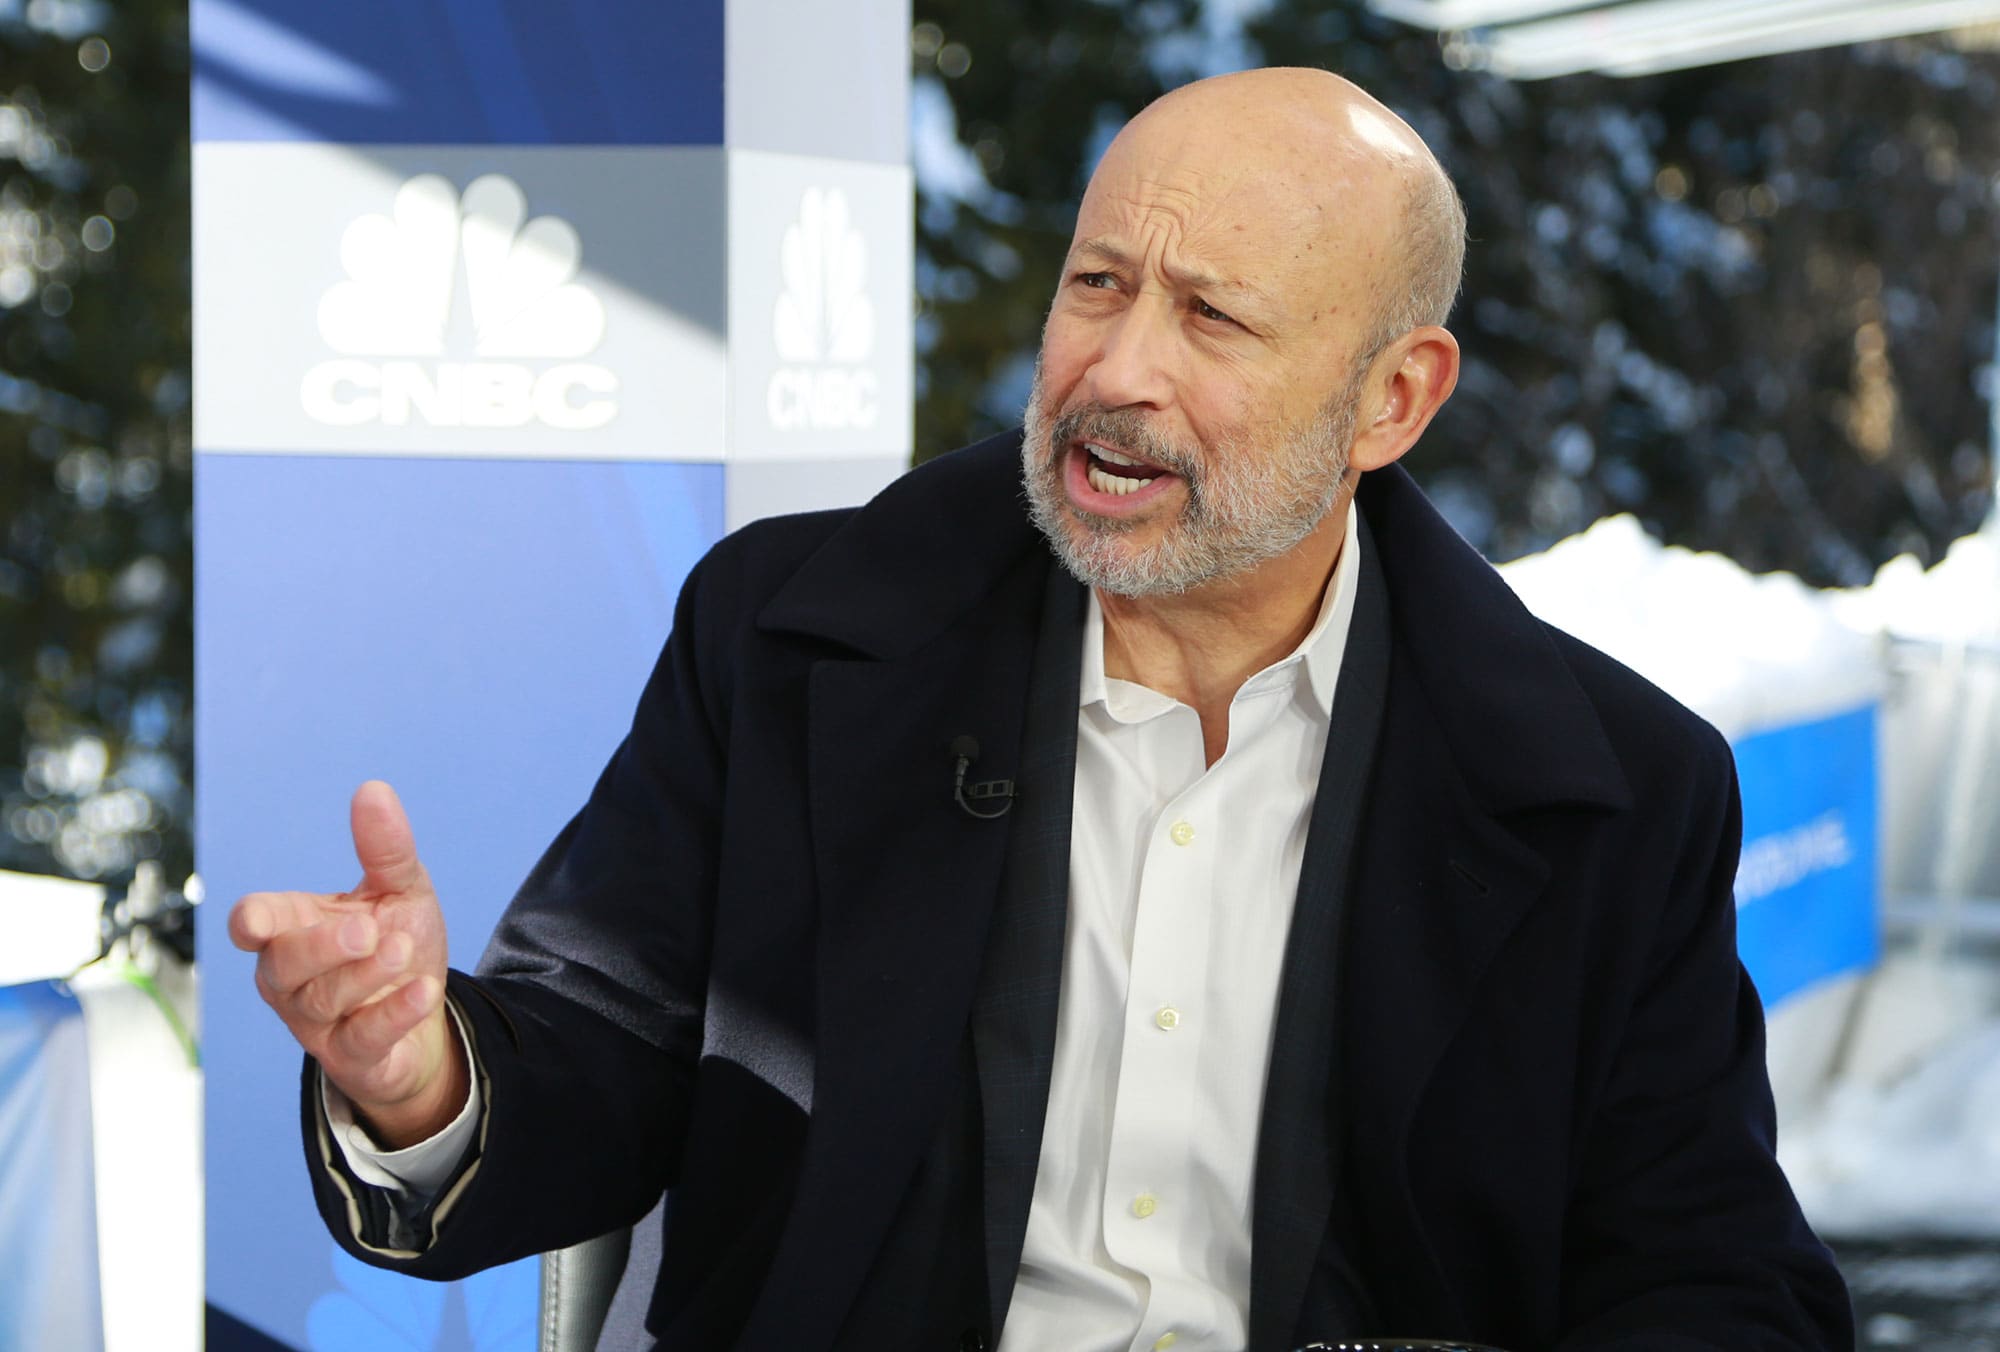 Lloyd Blankfein on how the SPAC rush may go improper for traders